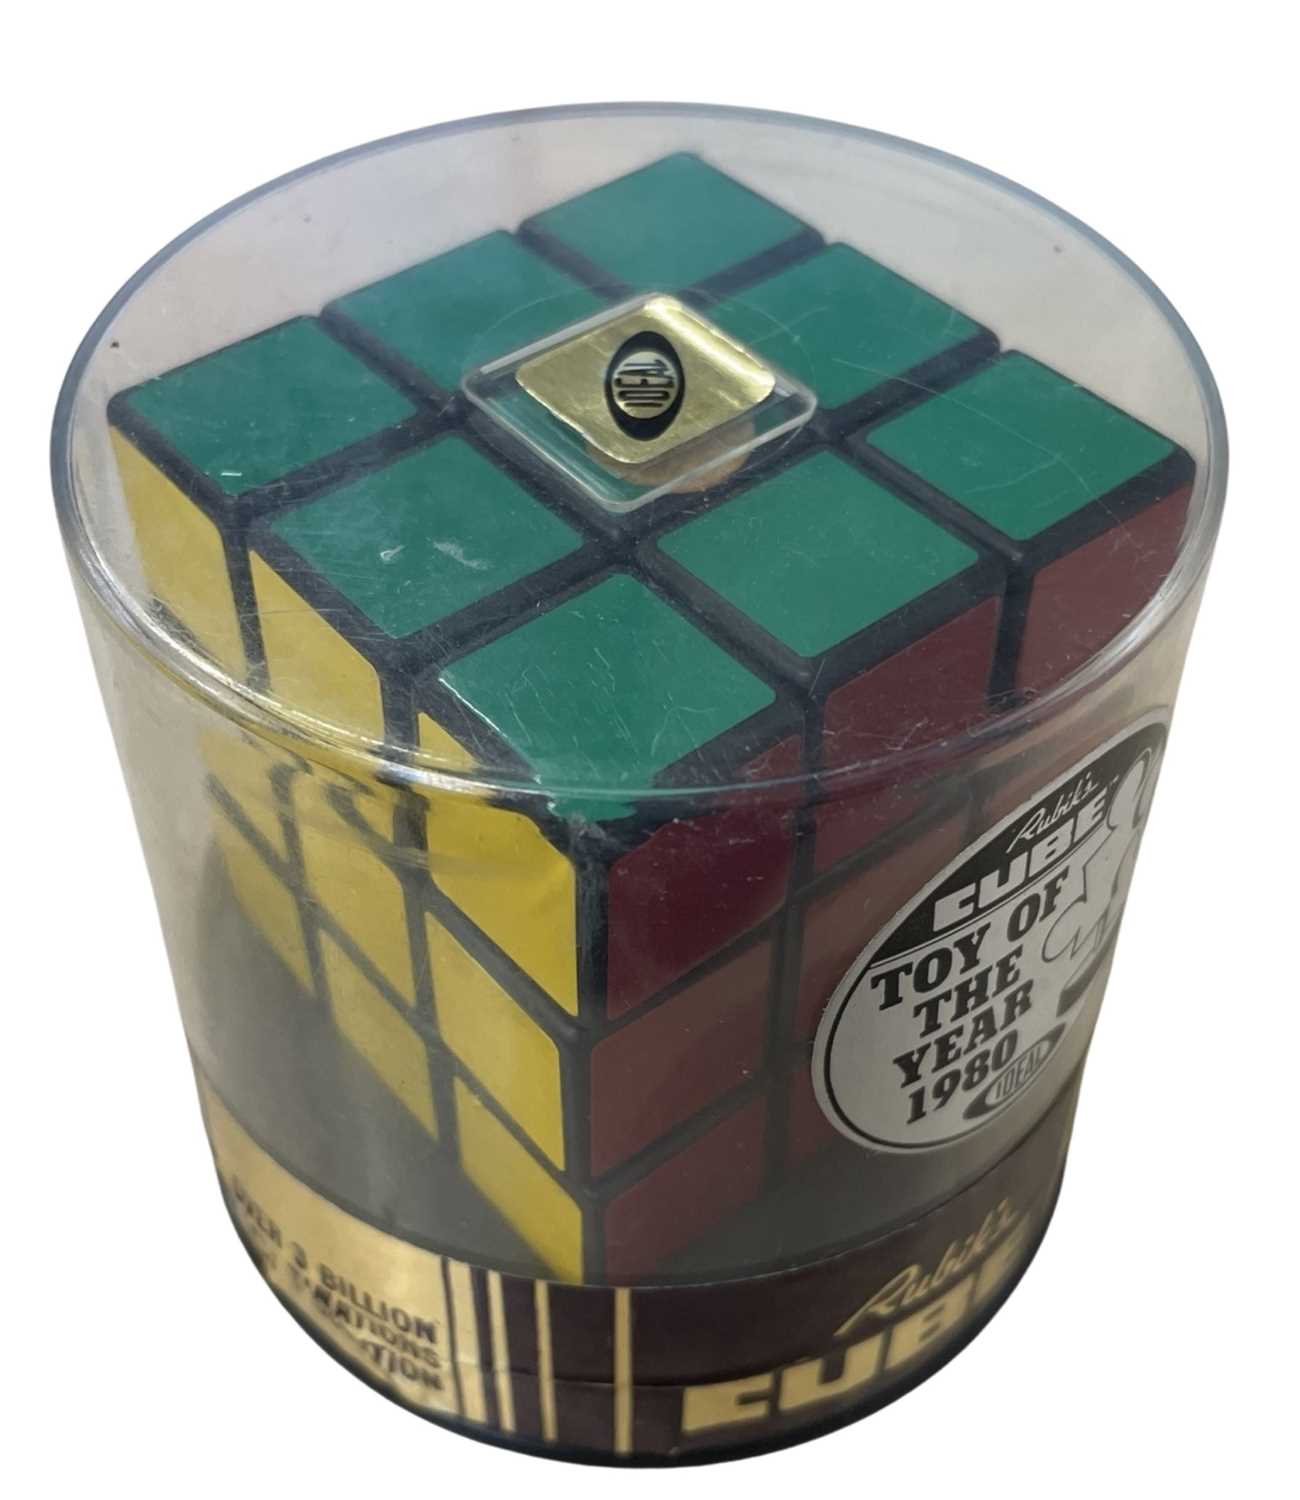 An original unopened Rubiks cube by Ideal toys, with 'Toy of the Year 1980' label